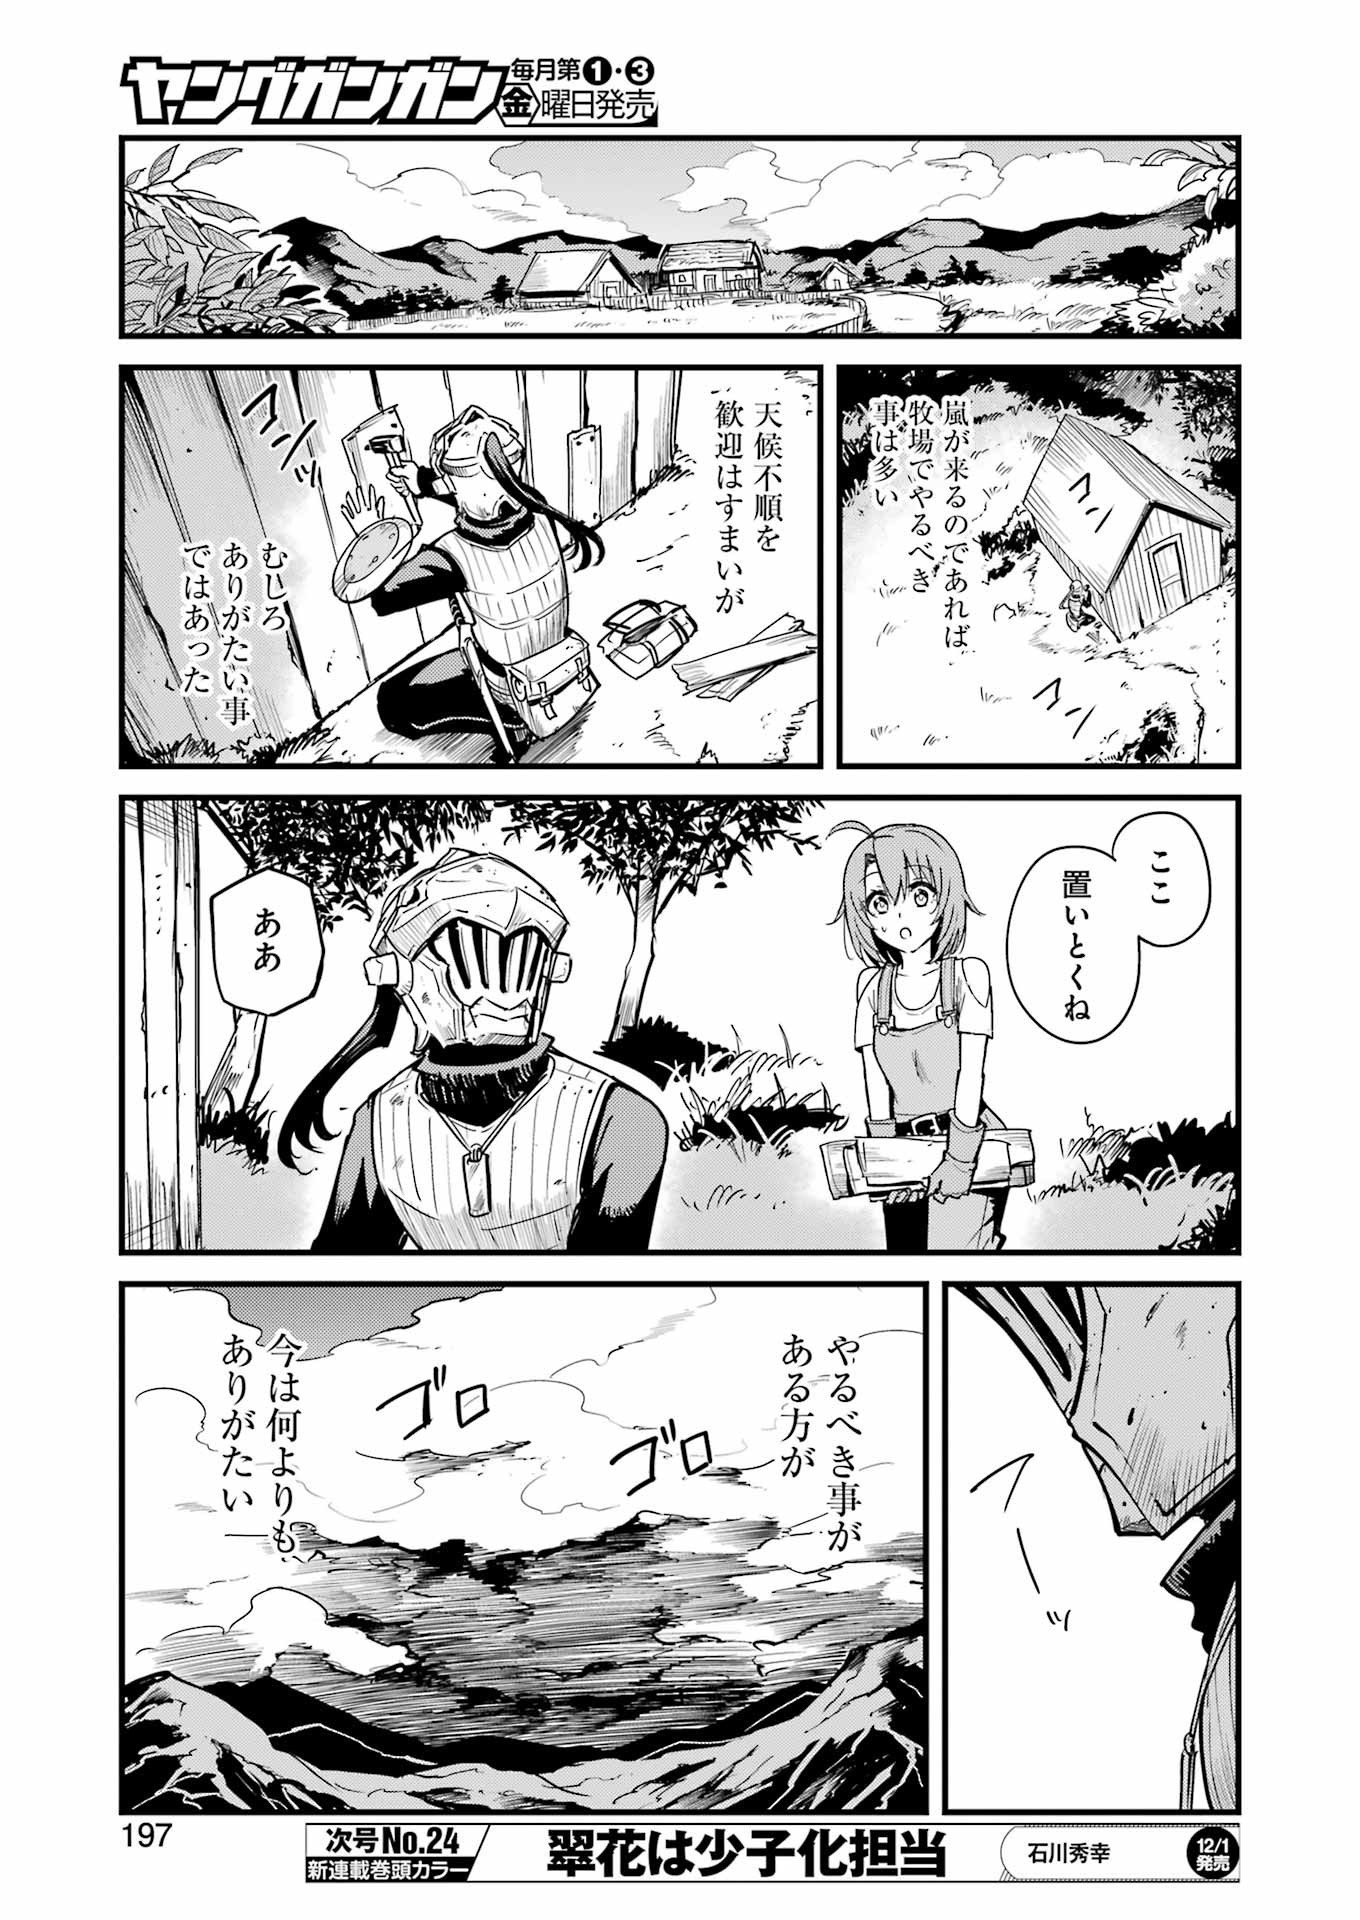 Goblin Slayer: Side Story Year One - Chapter 95 - Page 11